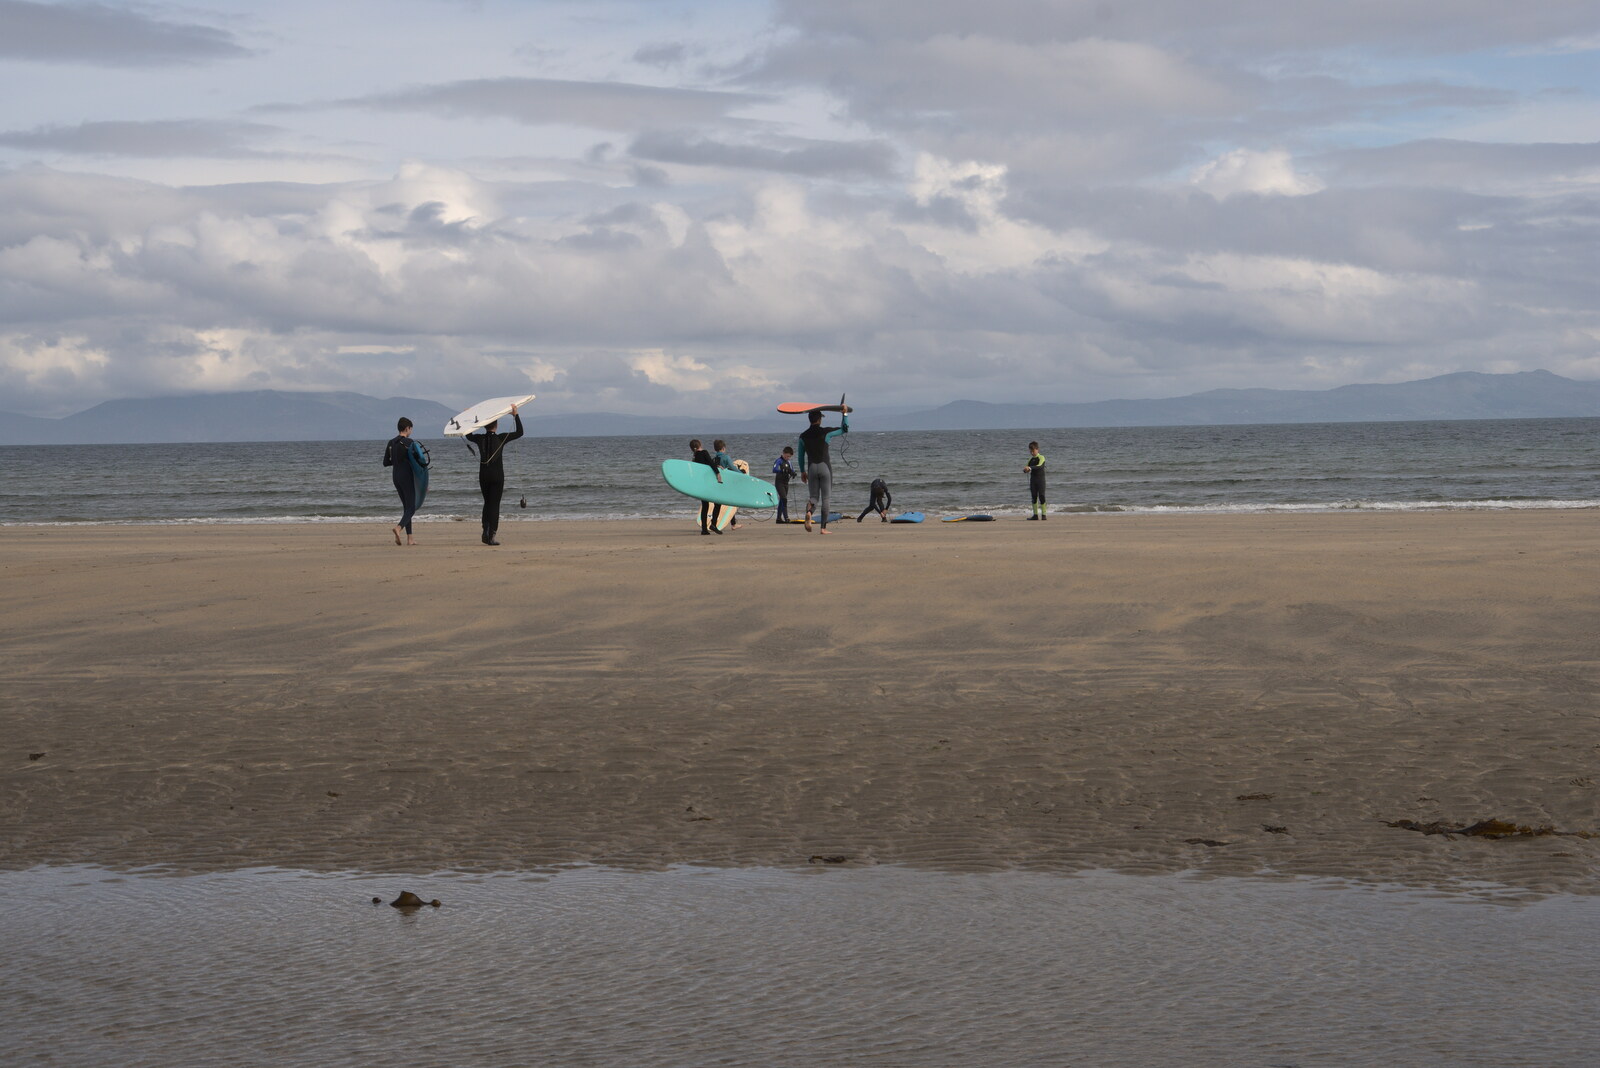 Pints of Guinness and Streedagh Beach, Grange and Sligo, Ireland - 9th August 2021: The surf school heads out to sea